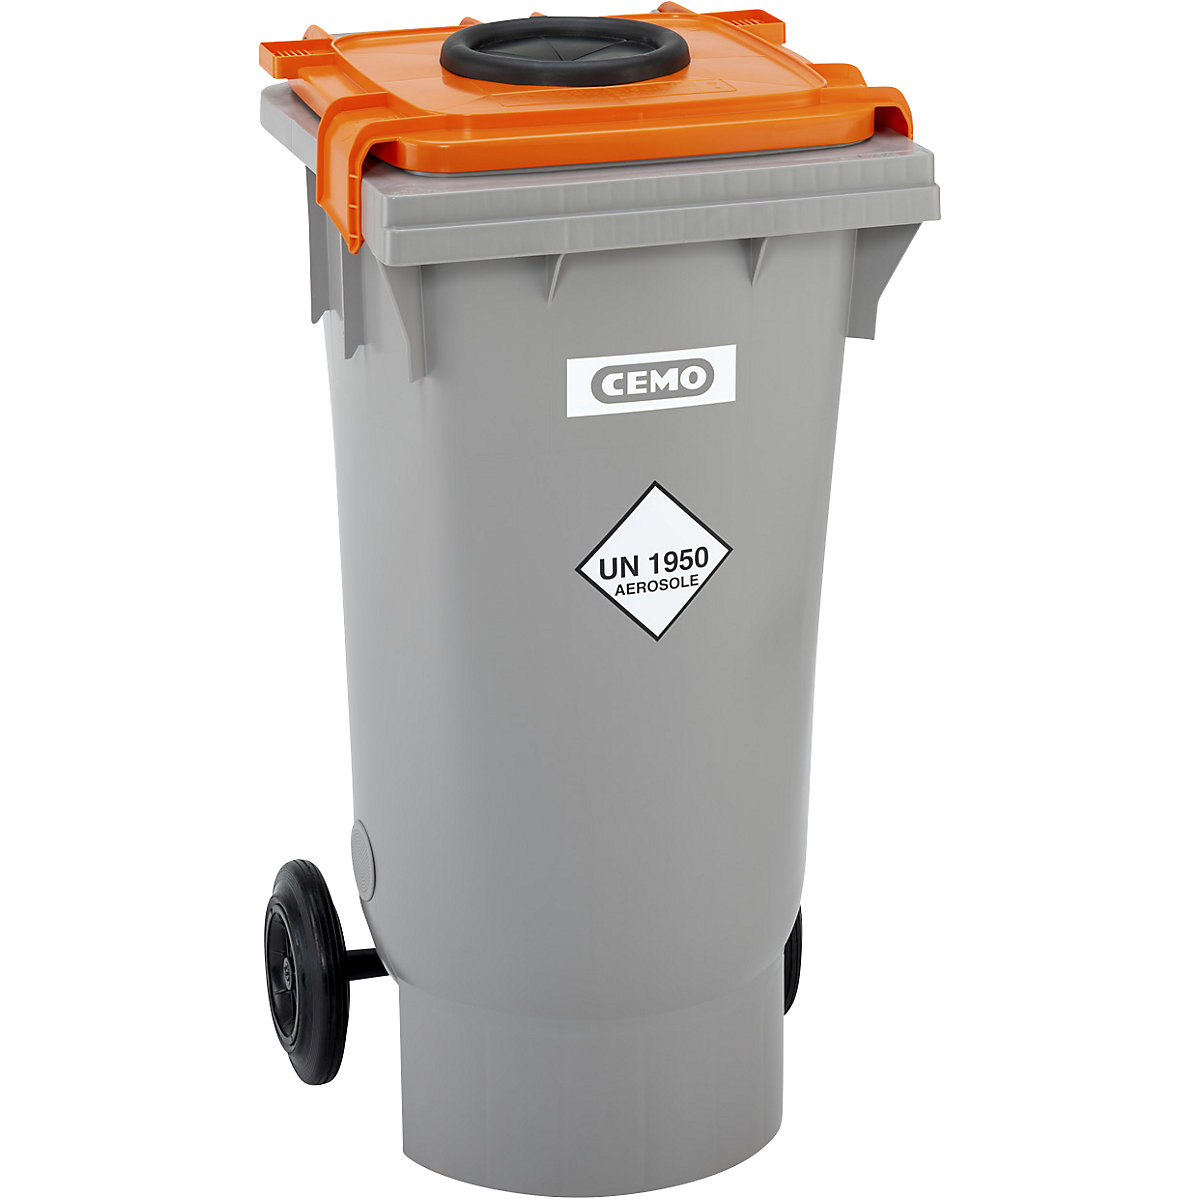 Spray can collection container - CEMO